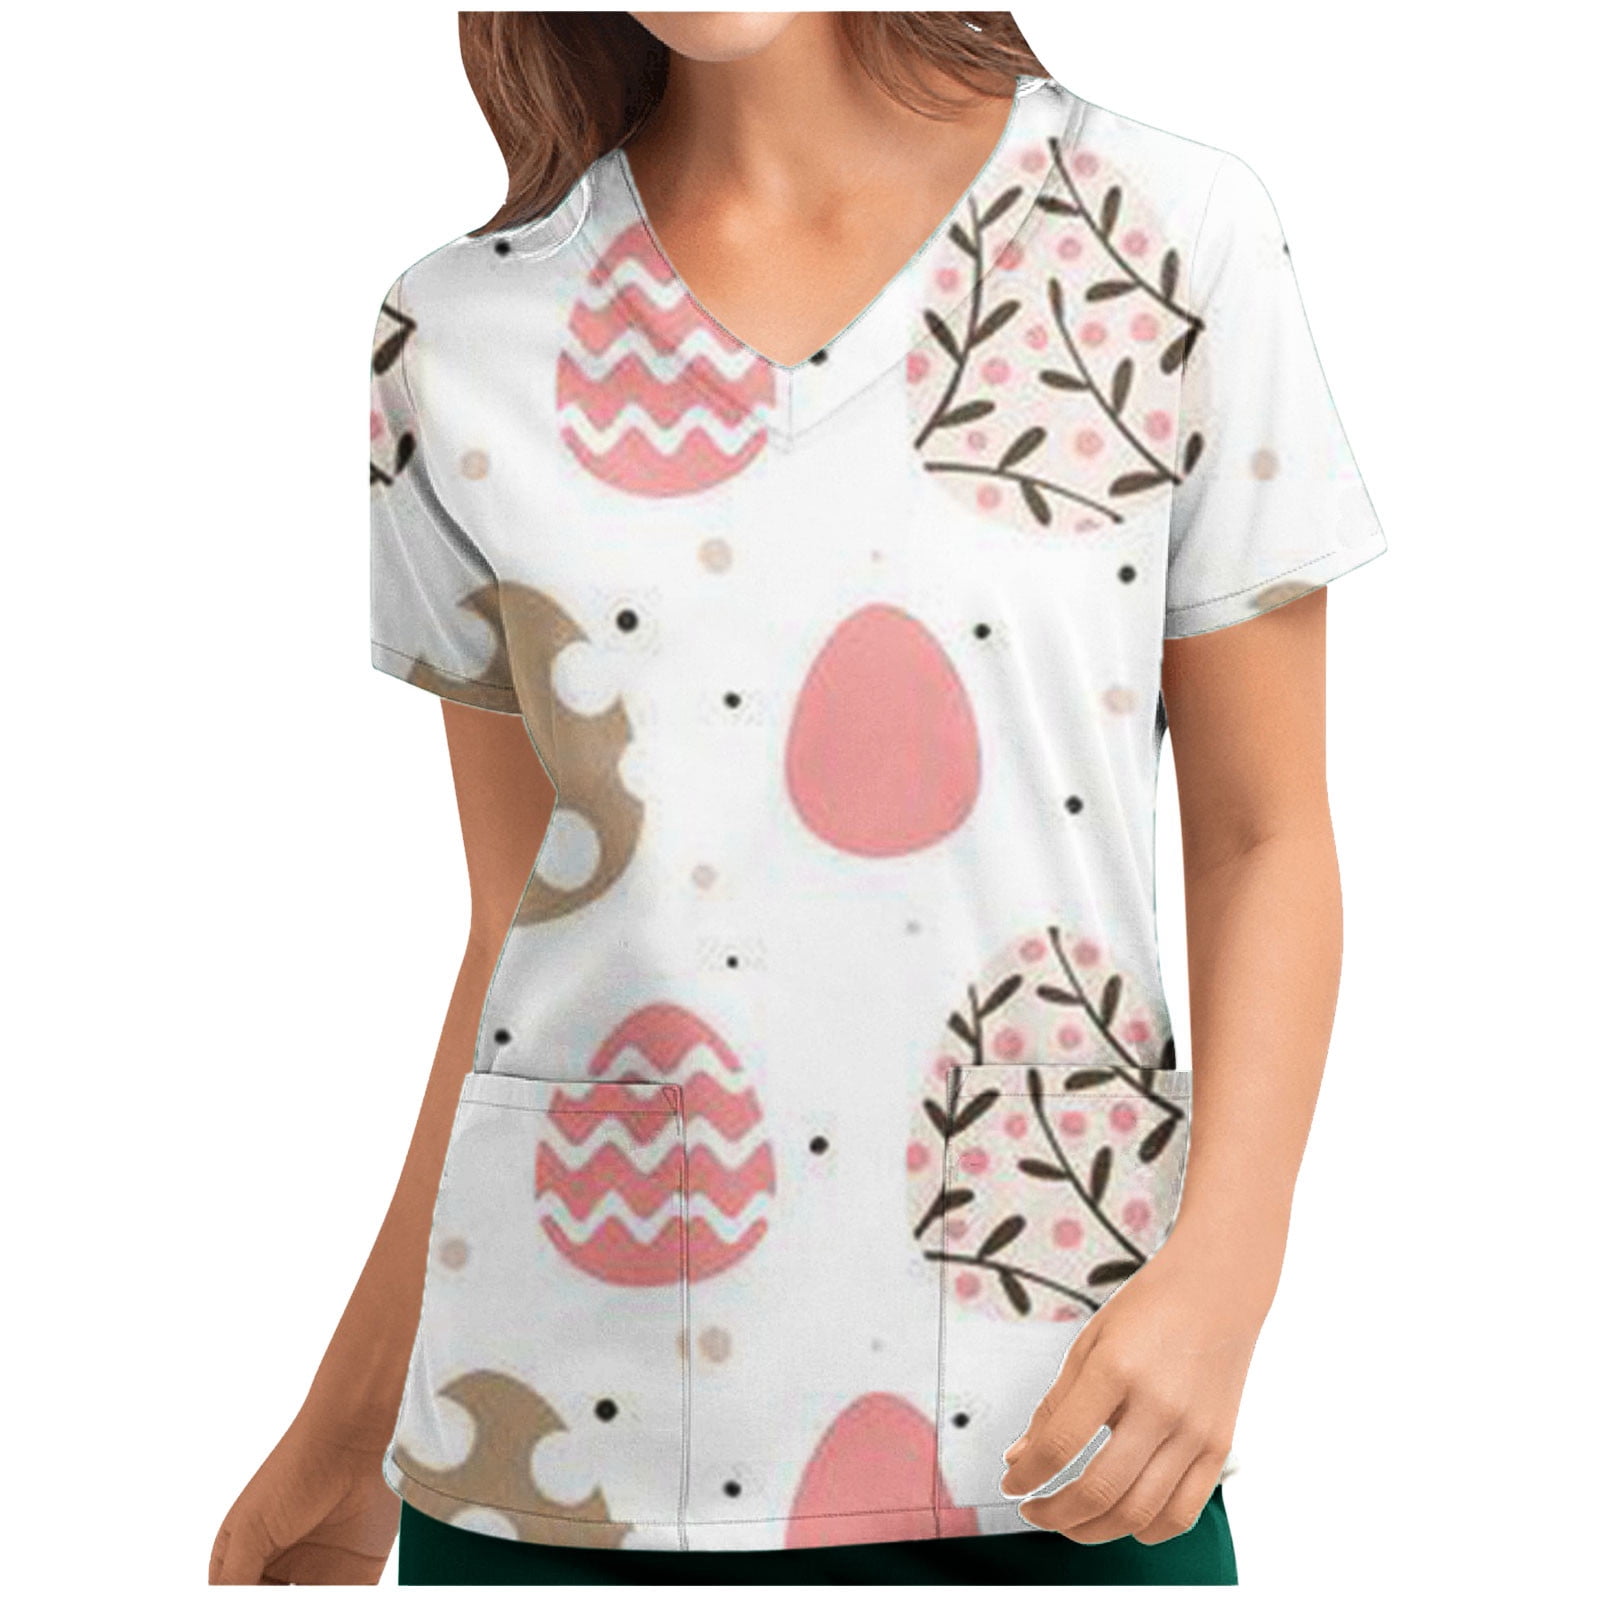 Womens V-Neck Professional Work Scrub_Tops with Pockets Cute Watermelon Printed Short Sleeve Tops Blouse Shirt 